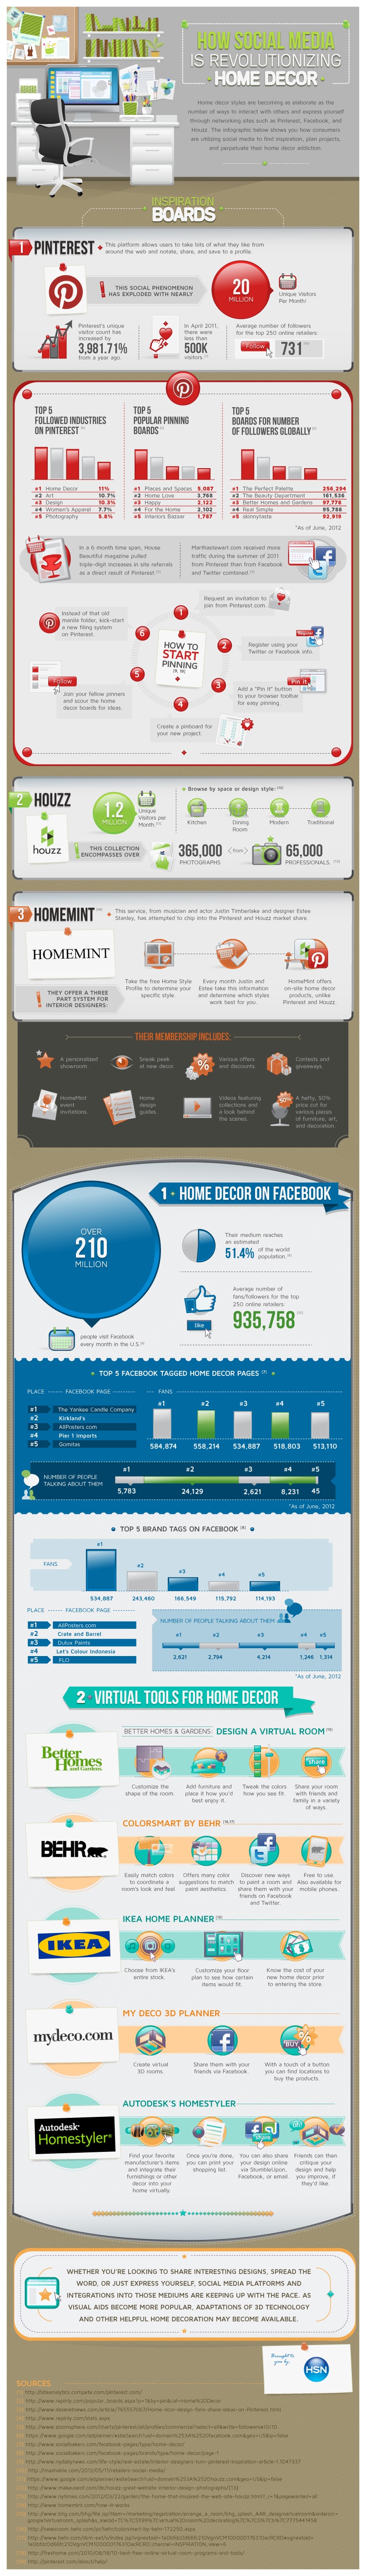 Social Media Is Transforming Home Design Space [Infographic]